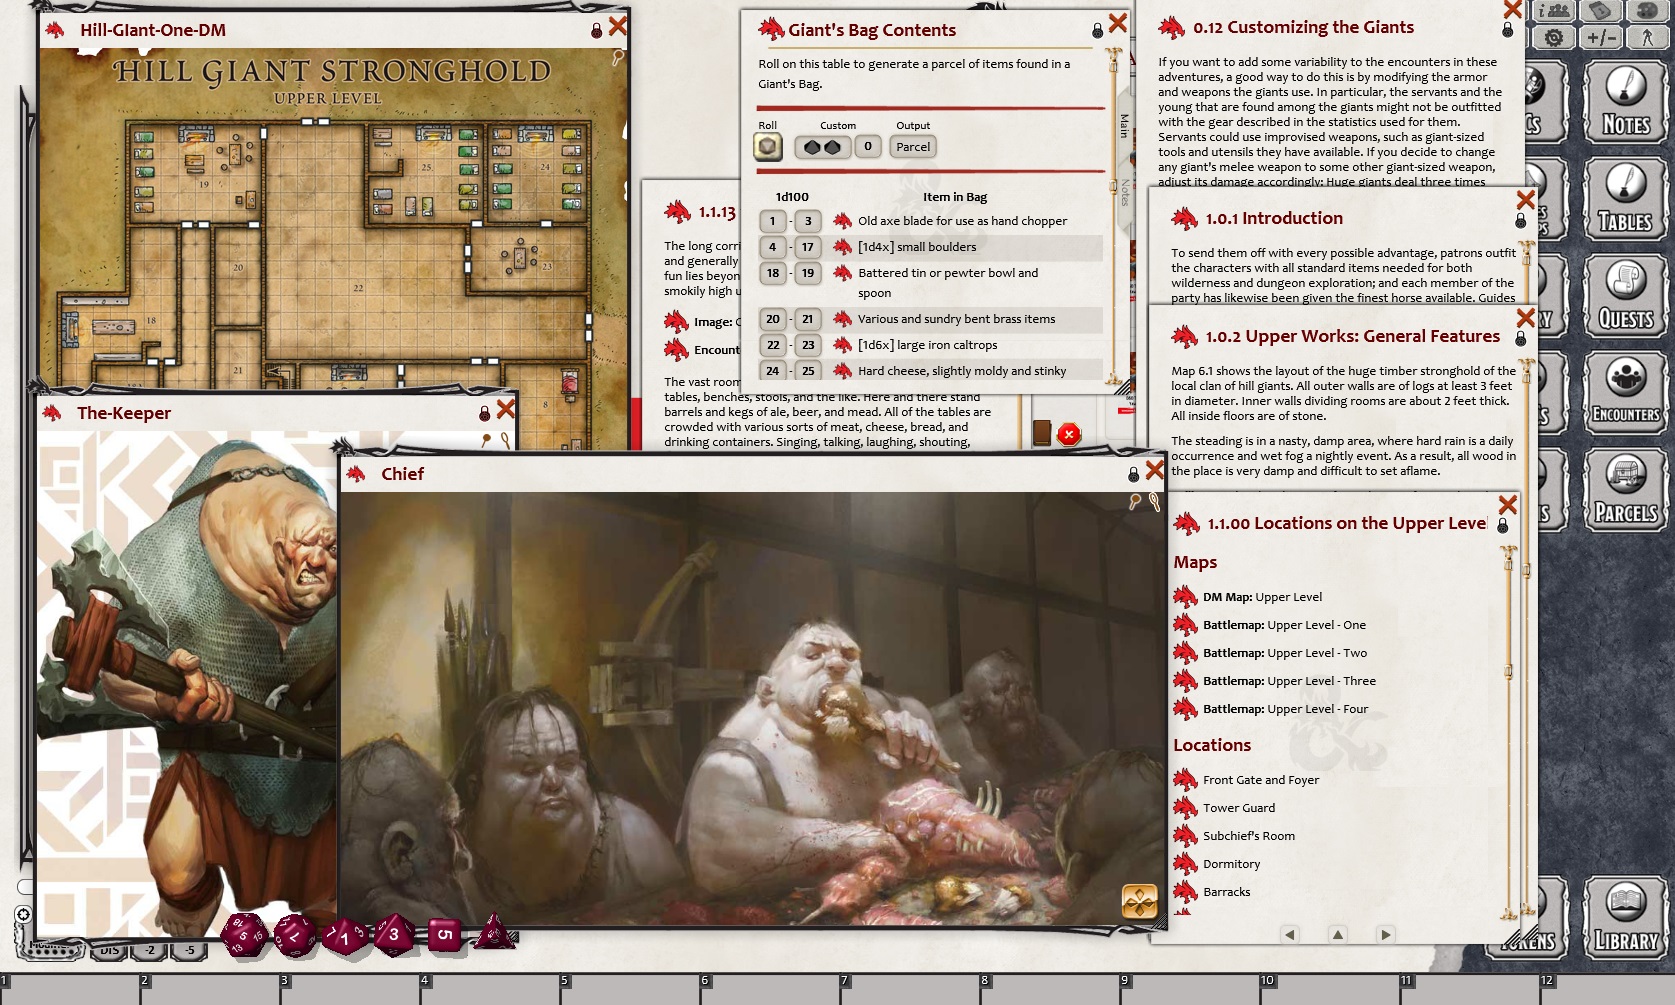 Fantasy Grounds - D&D Tales from the Yawning Portal screenshot